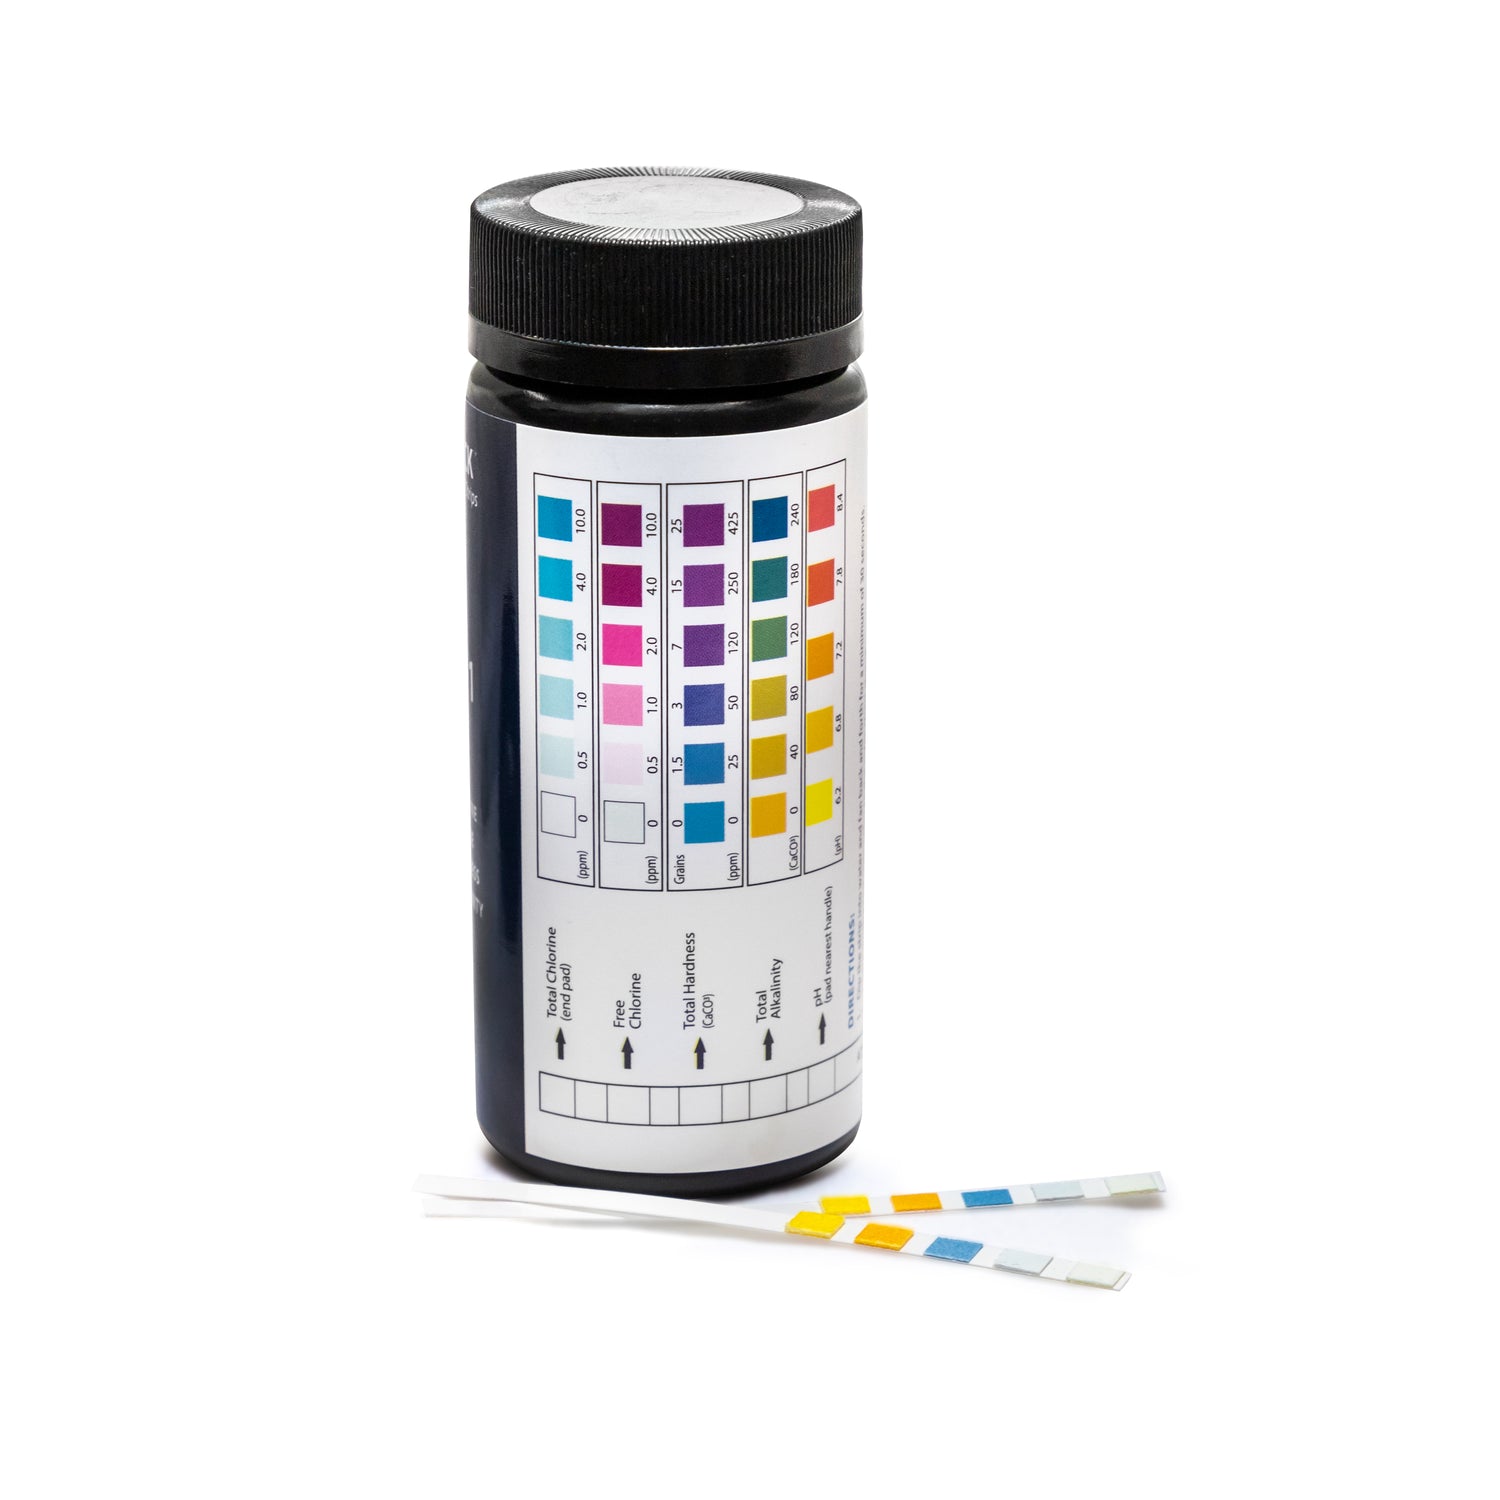 Aquasure Water Quality and hardness Test Strips